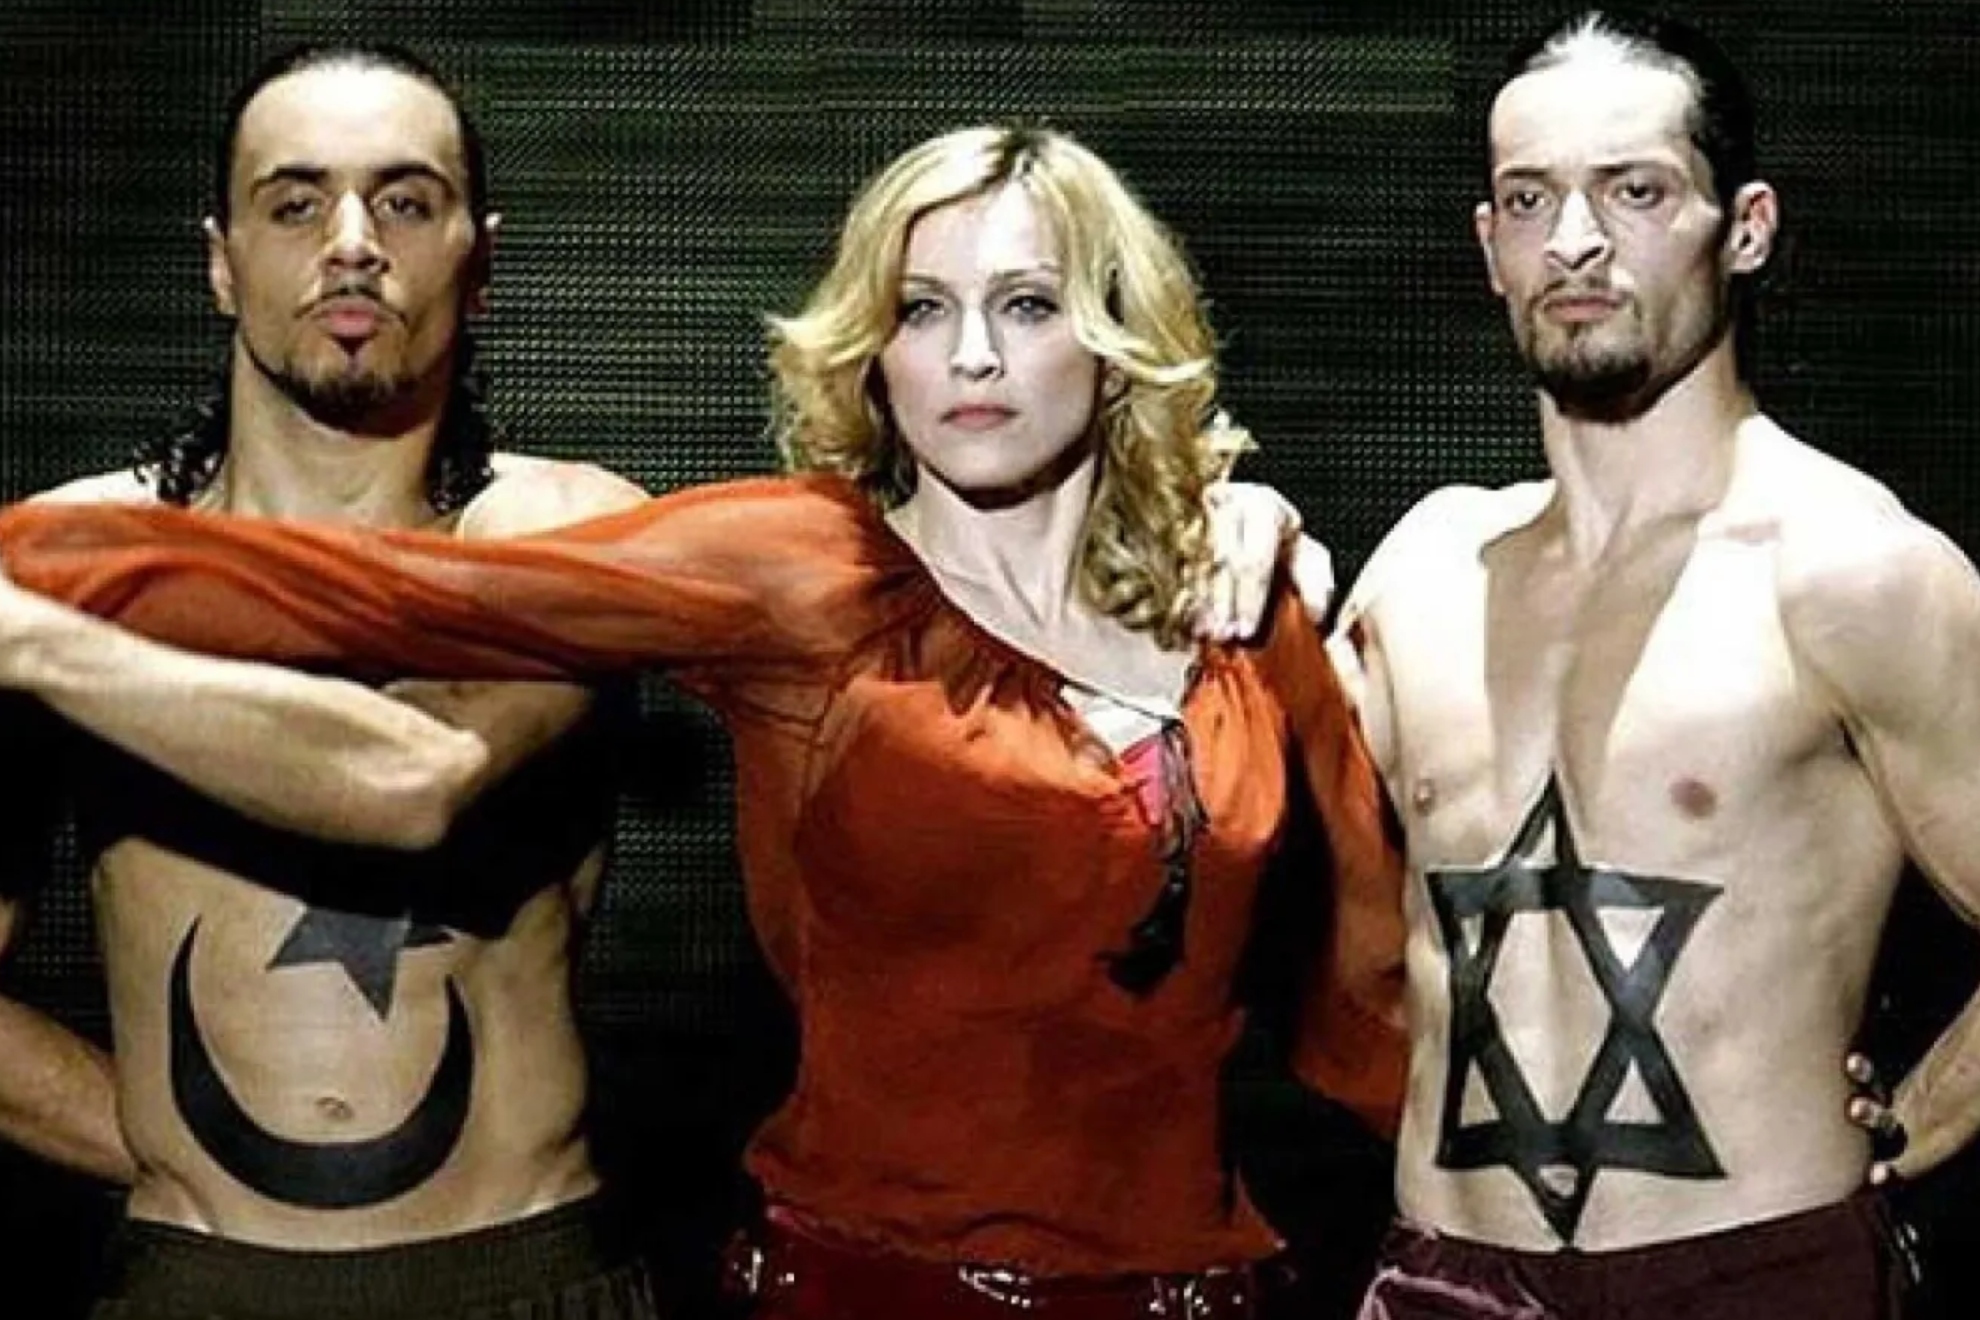 Madonna during the Confessions Tour